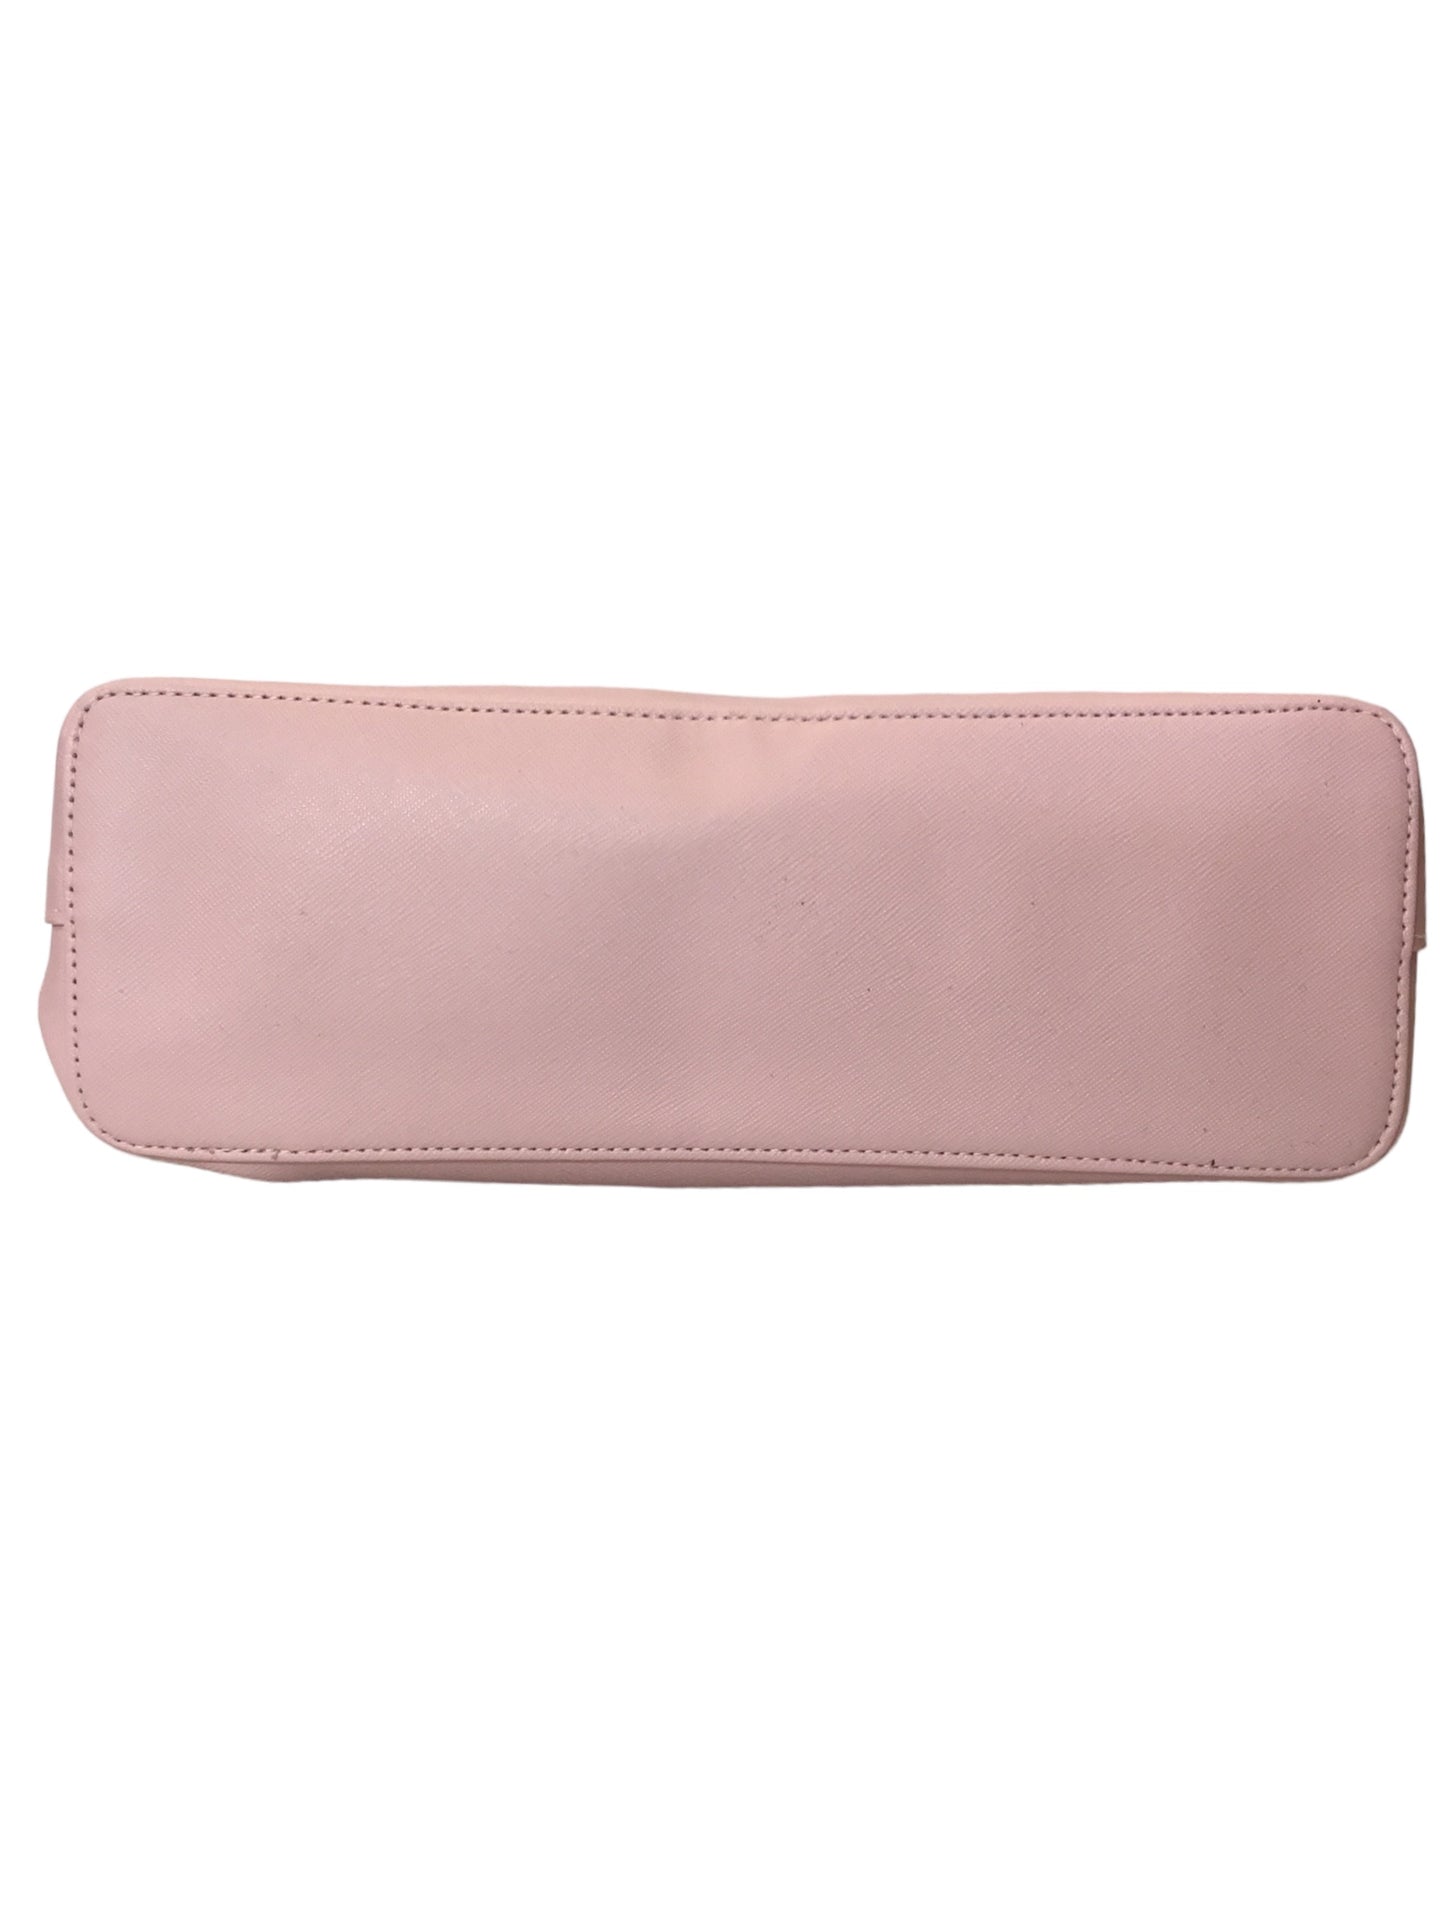 Makeup Bag By Ted Baker